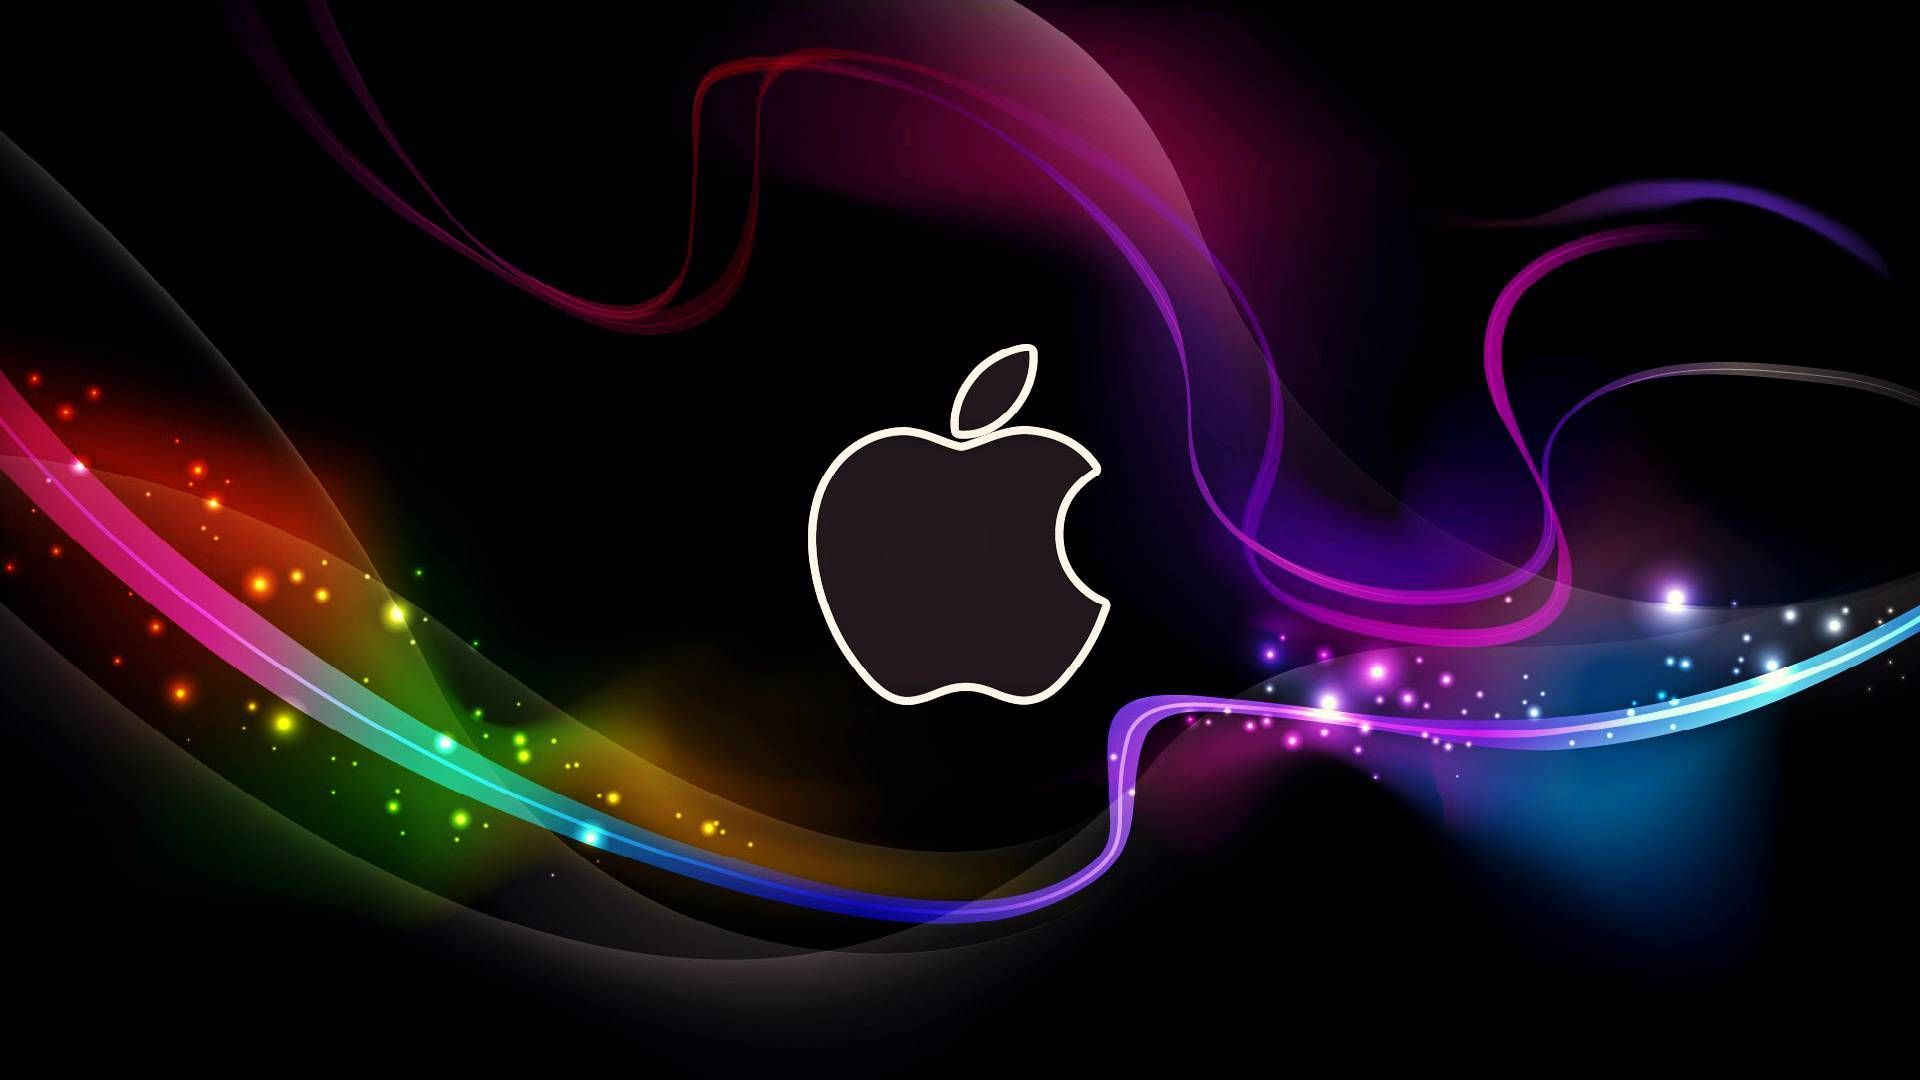 Cool apple wallpapers